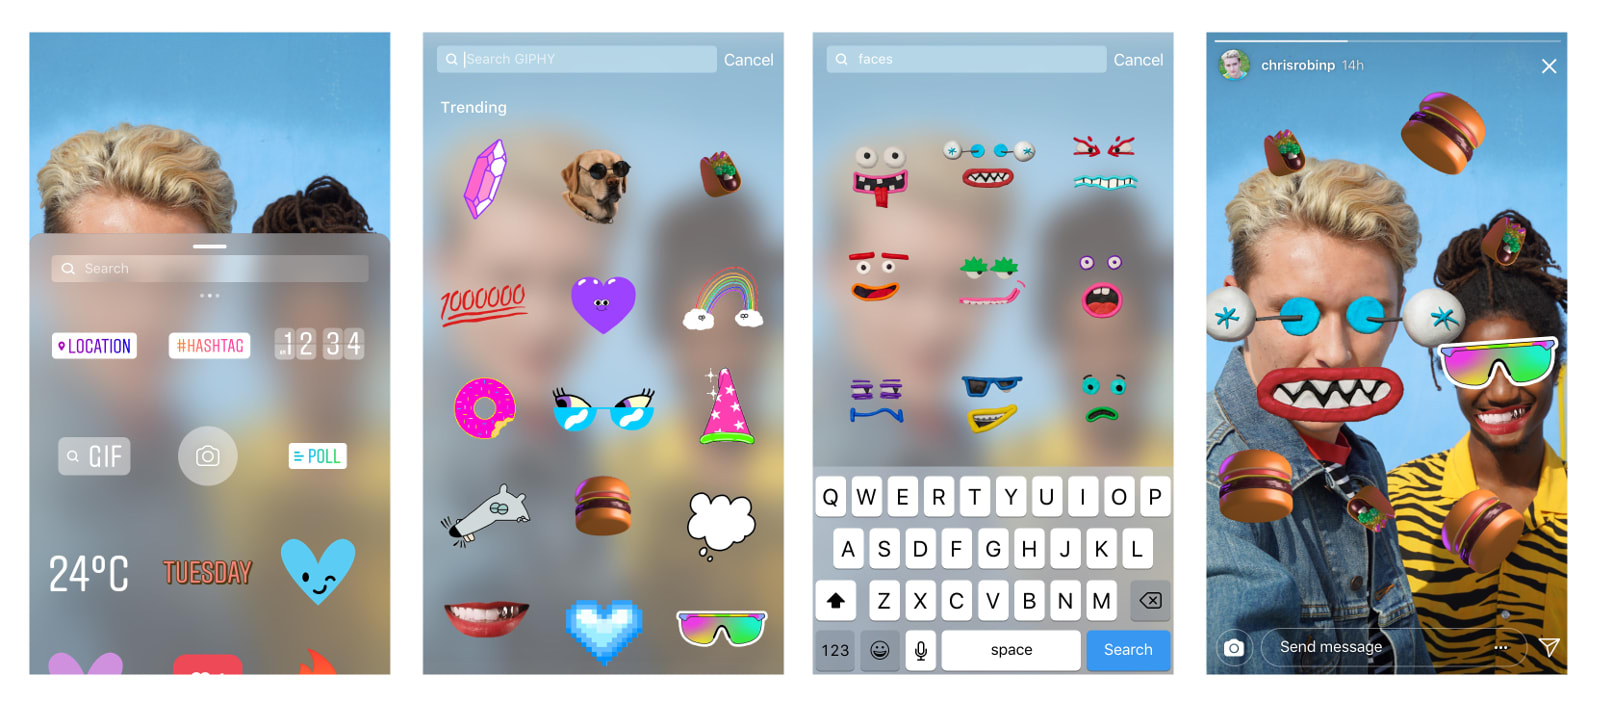 Instagram Stories Harness The Power Of Giphy For Animated Stickers